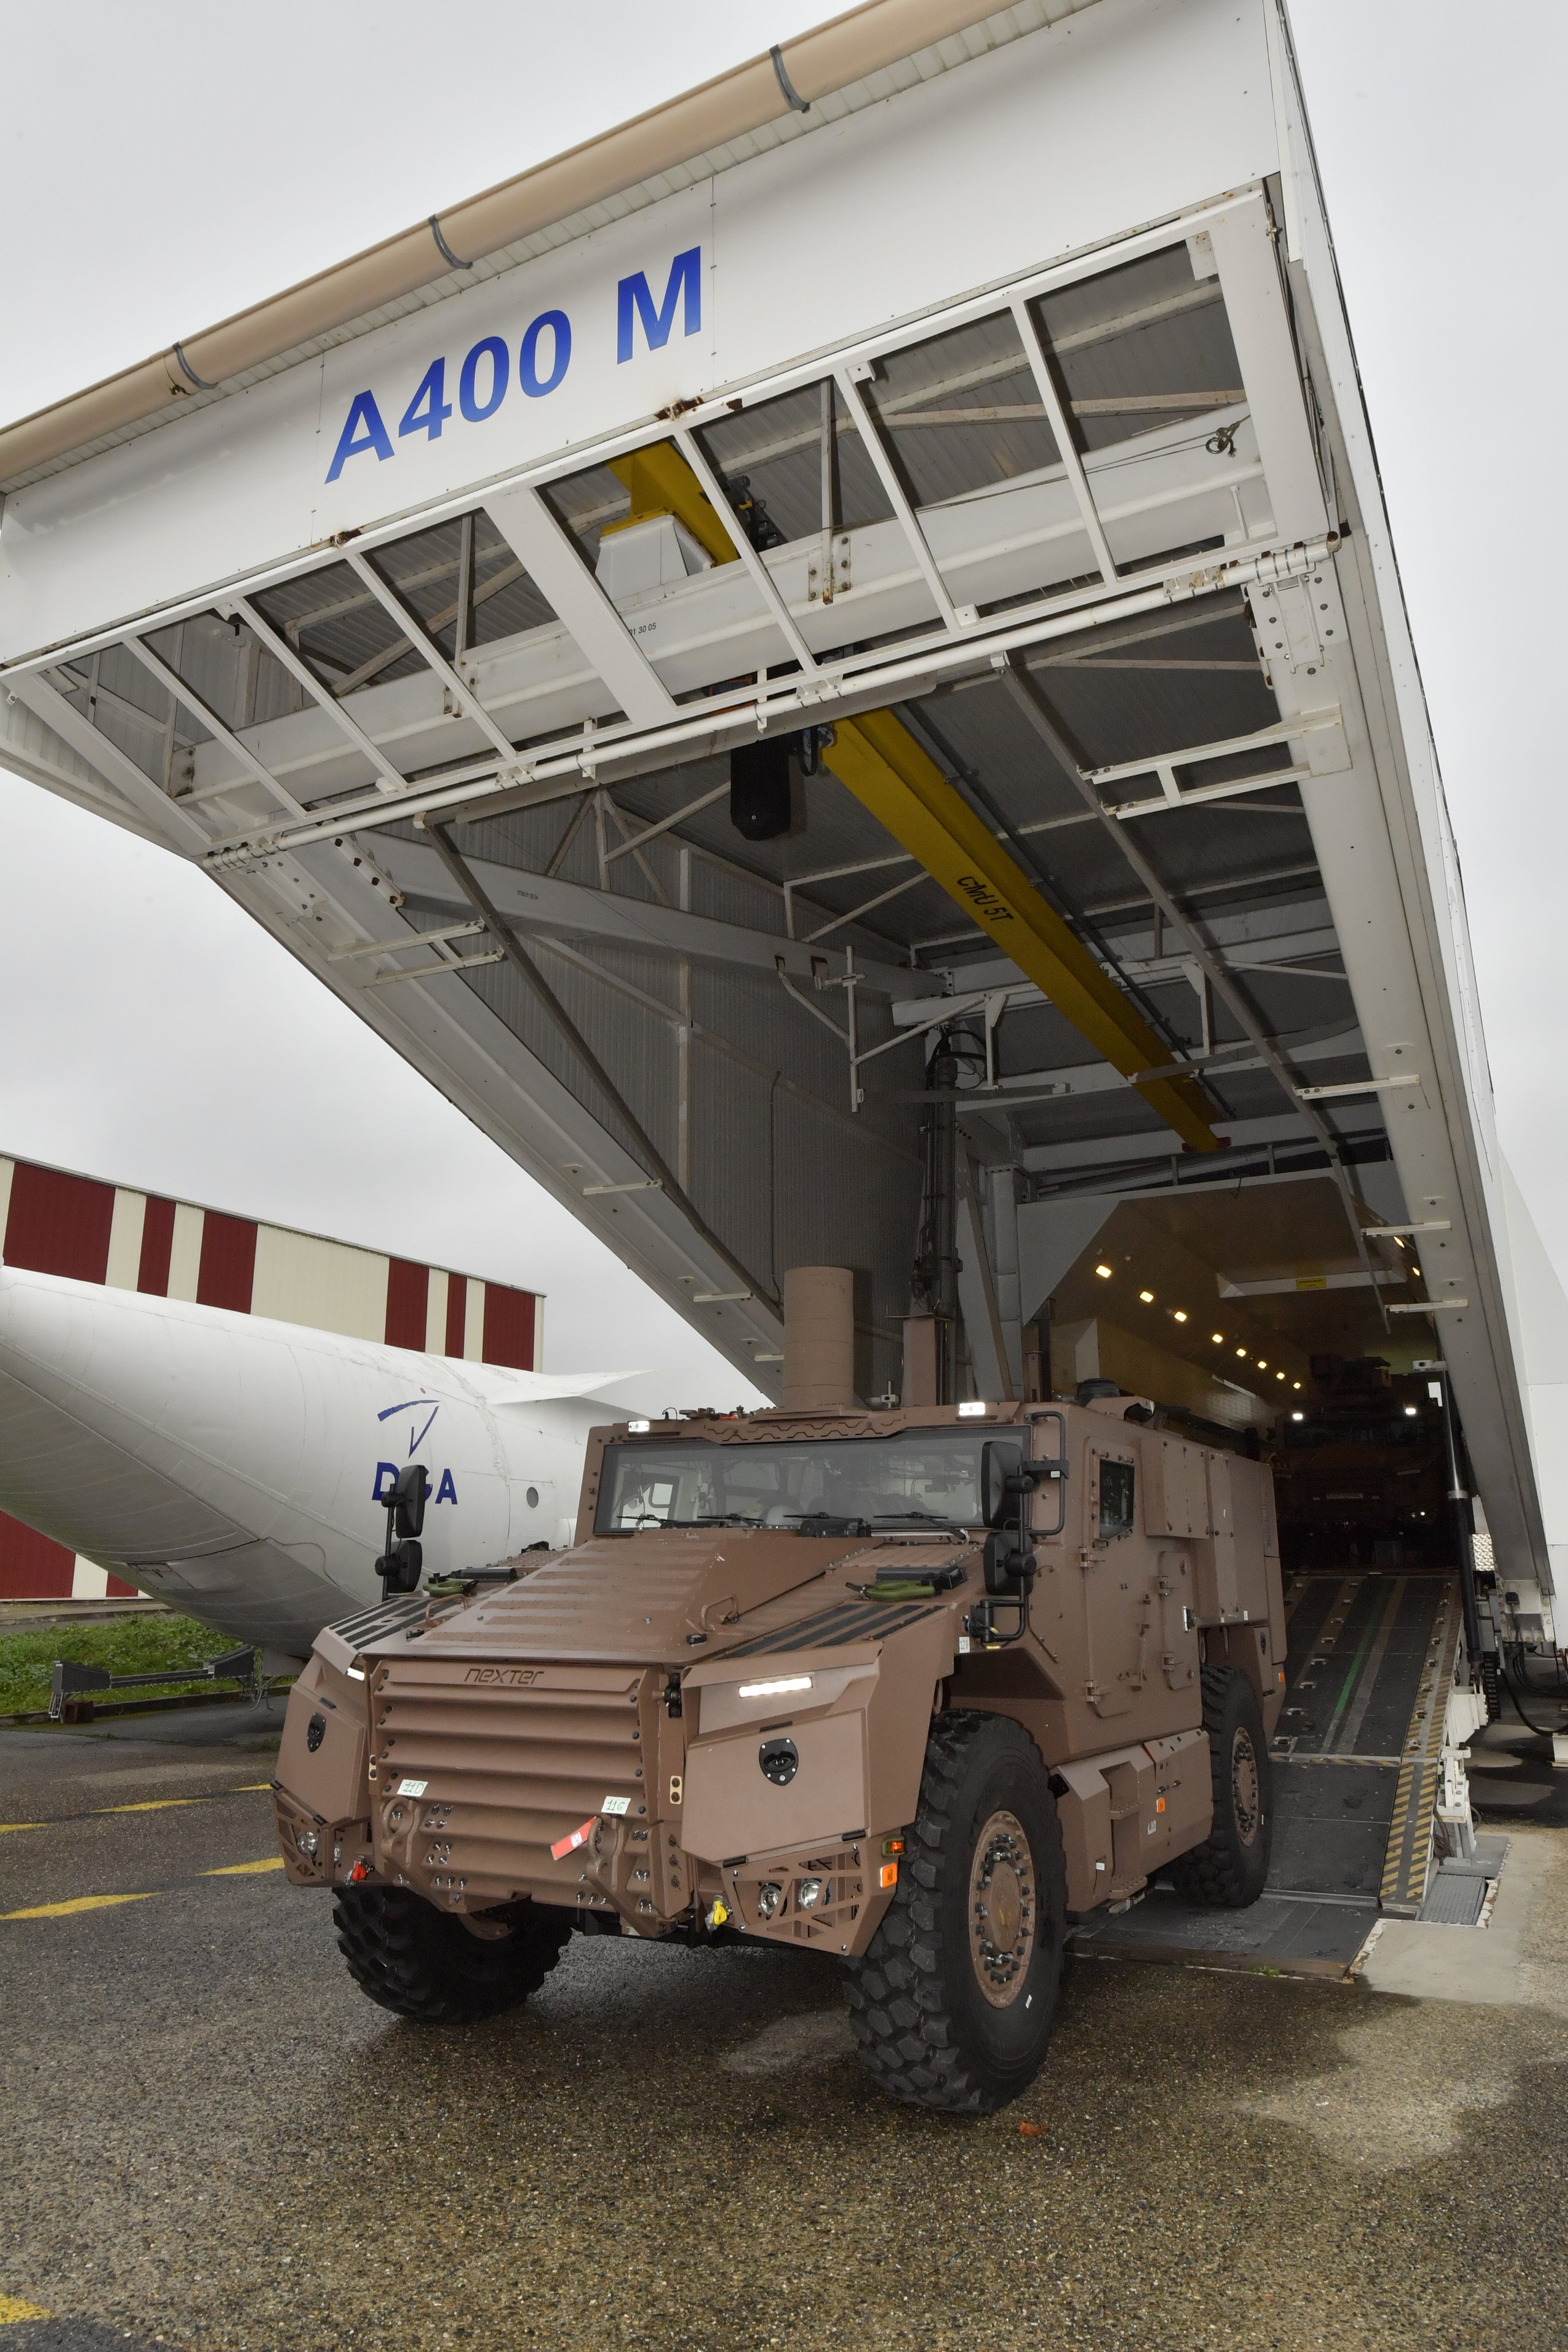 The Frence DGA has conducted the first loading on A400 military transport aircraft with the French Army new VBMR Leger Serval 4x4 armored vehicle on December 11, 2020.